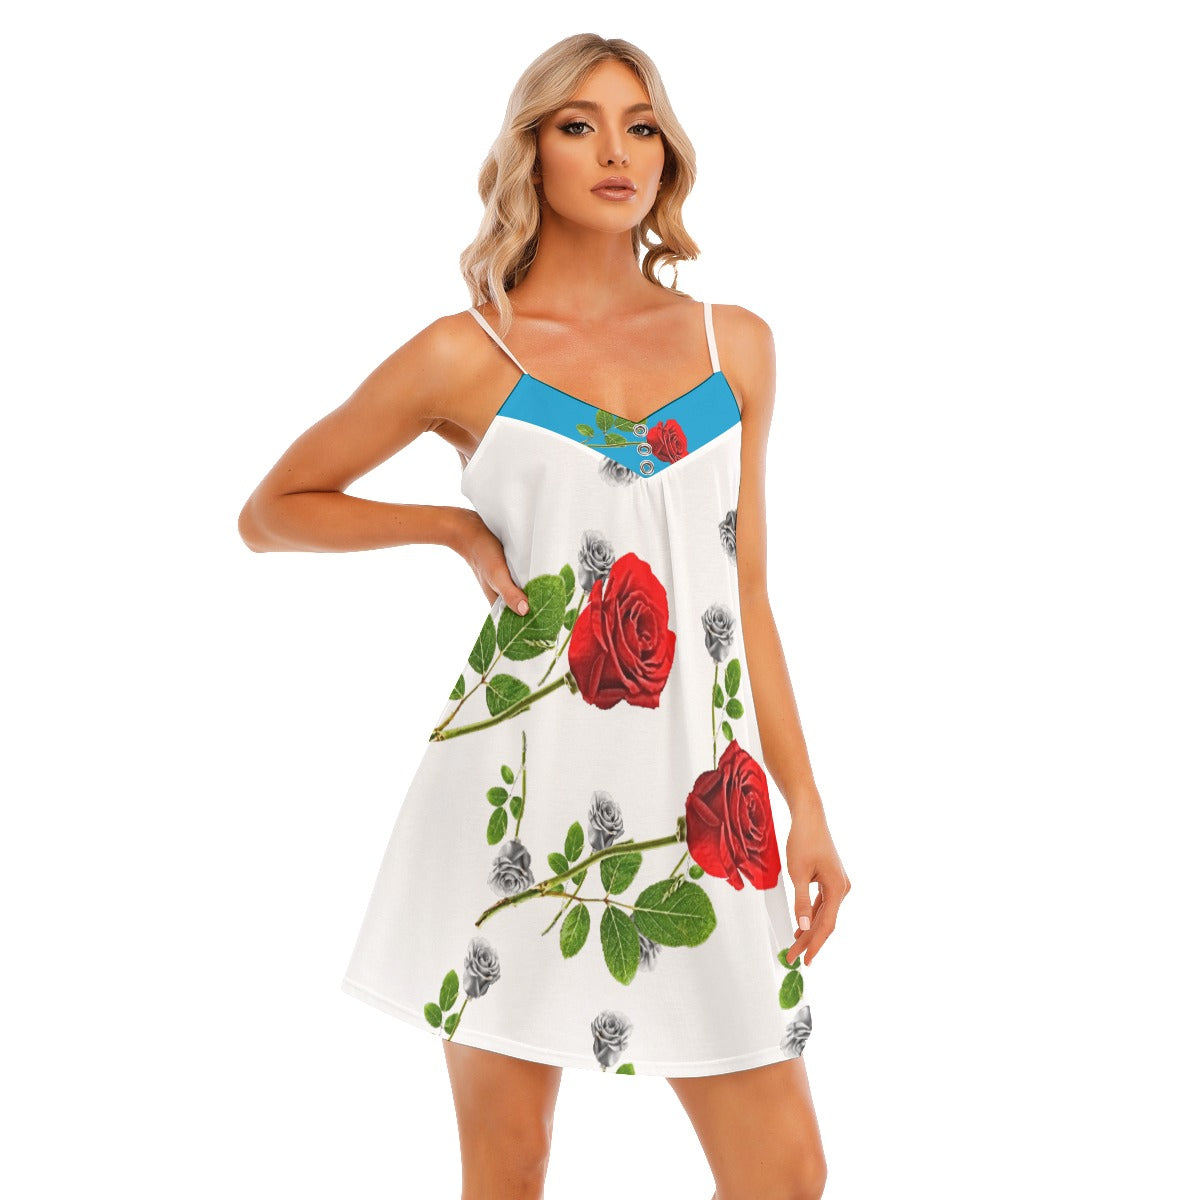 Xcarii Xii - Double Rose Cami Dress